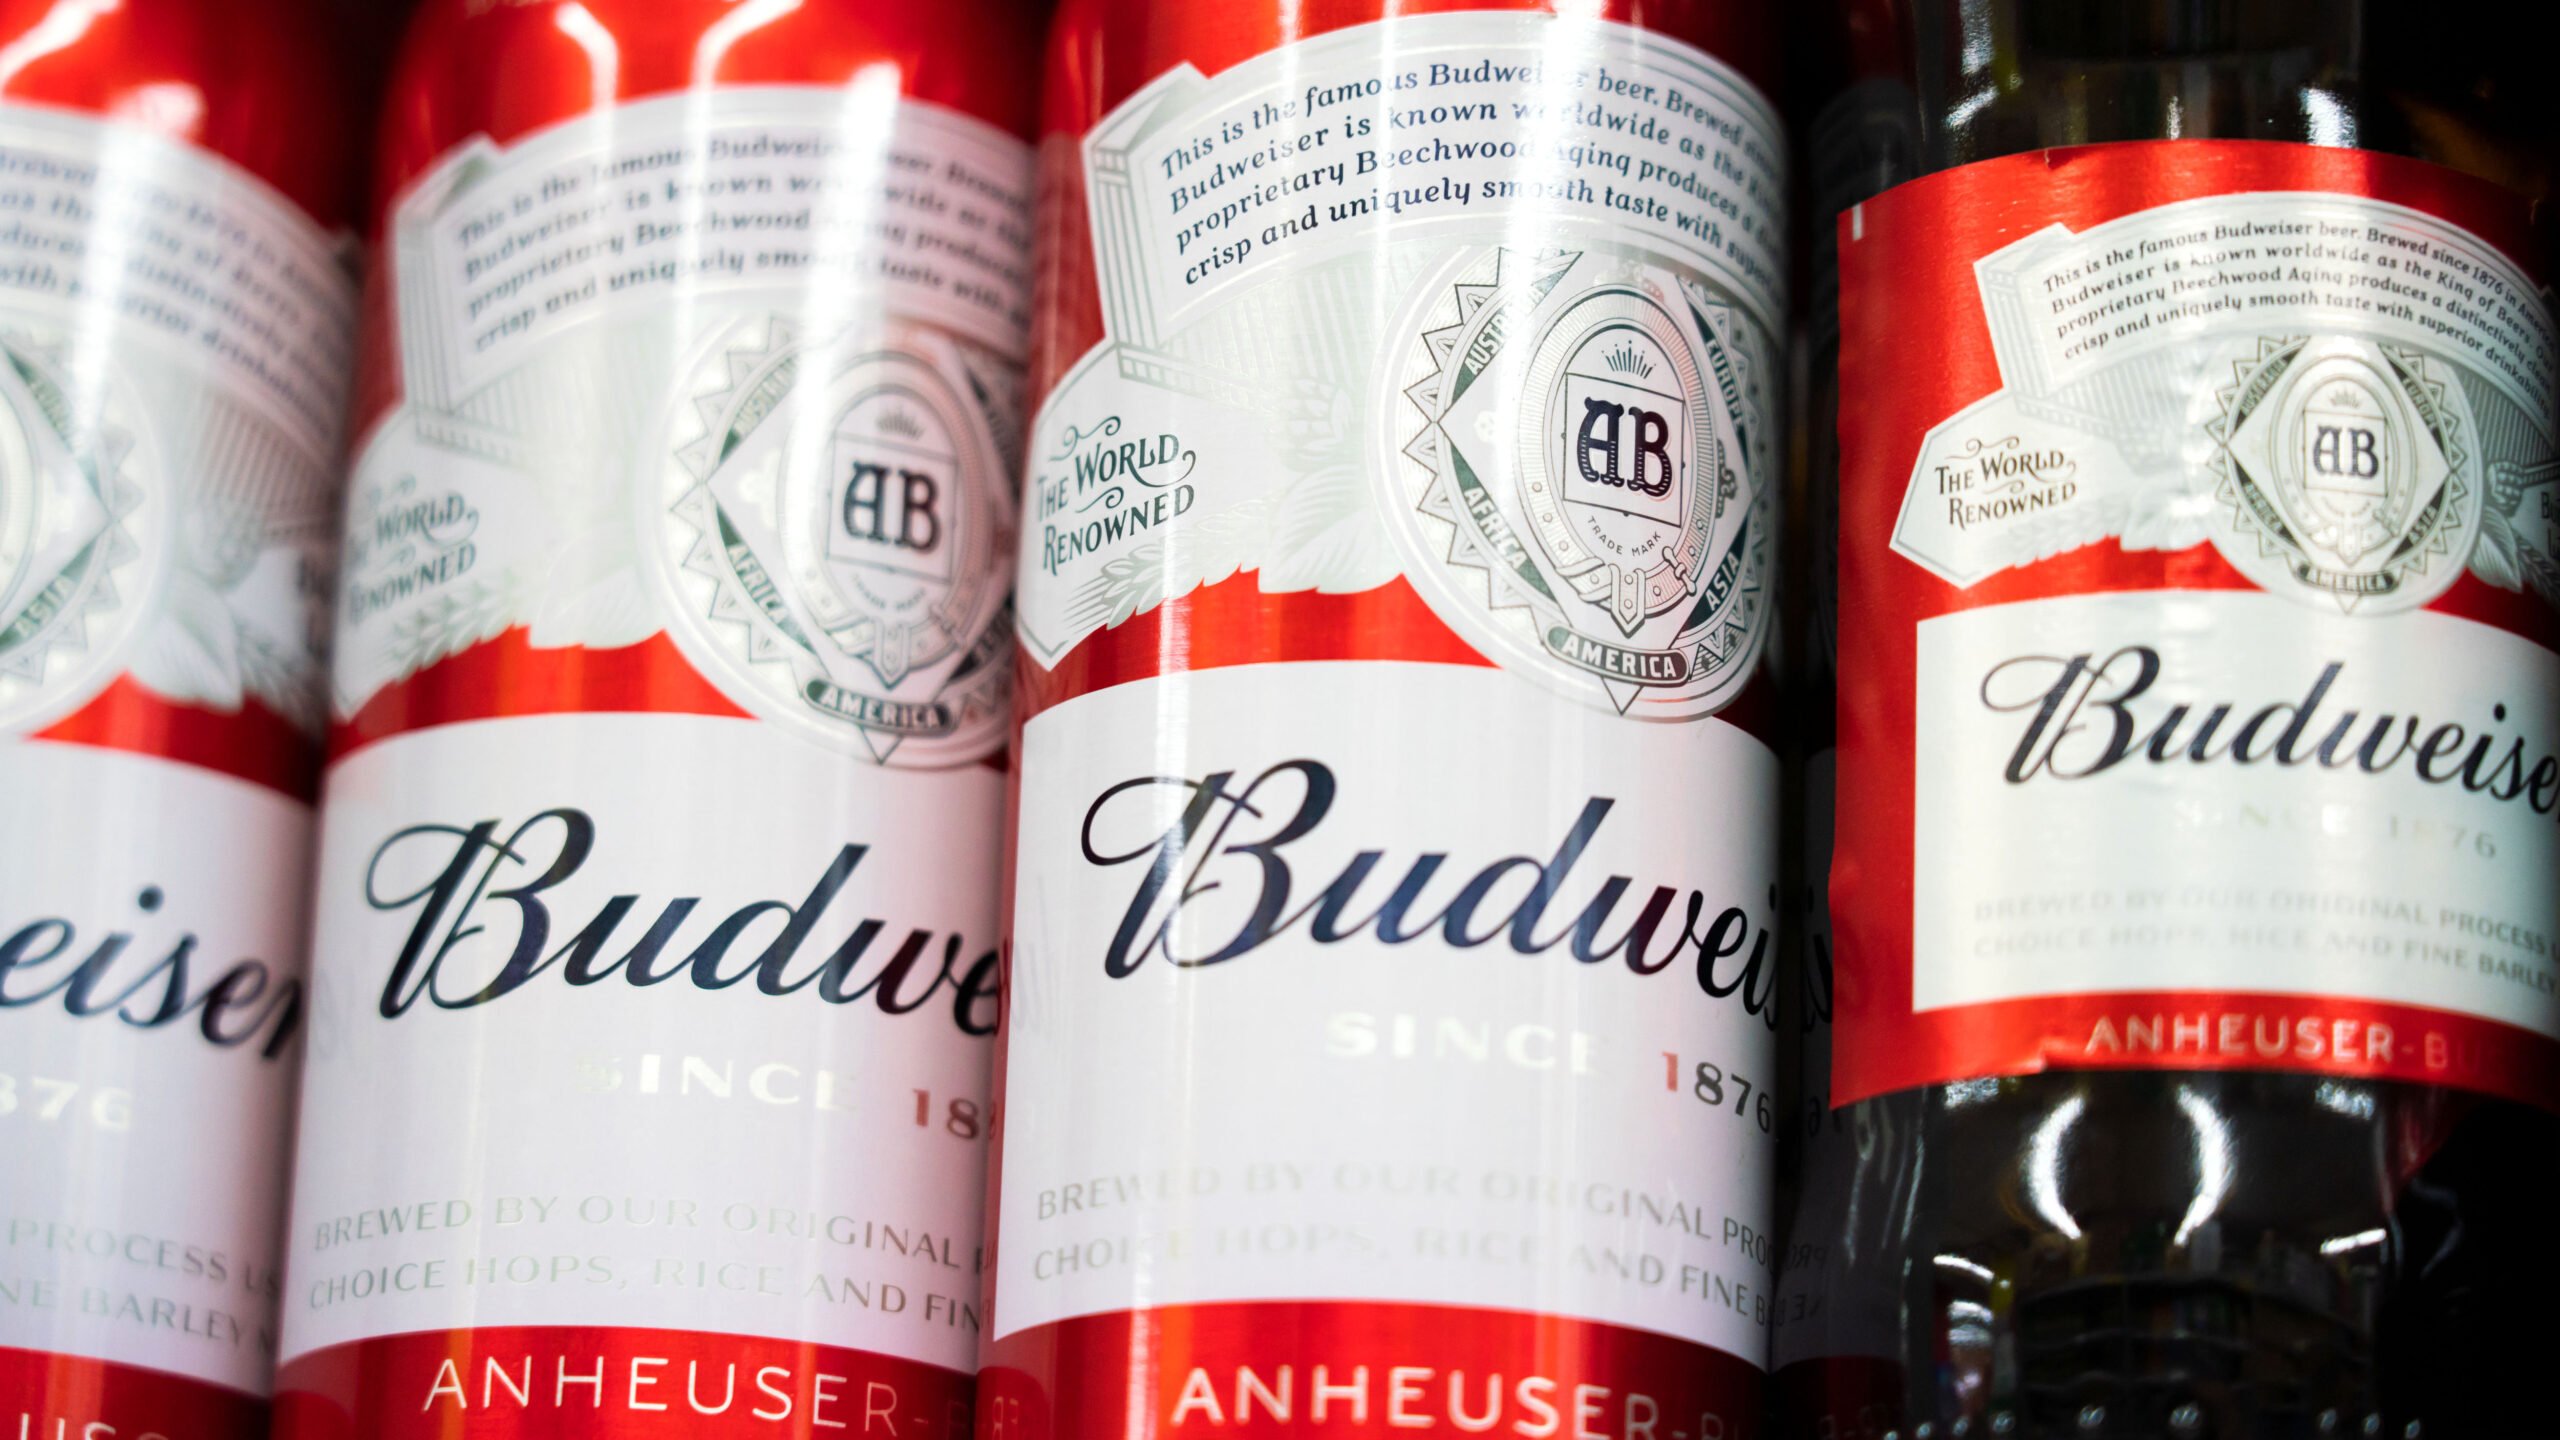 Budweiser Releases New Ad Amid Transgender Controversy, Gets Blasted Online